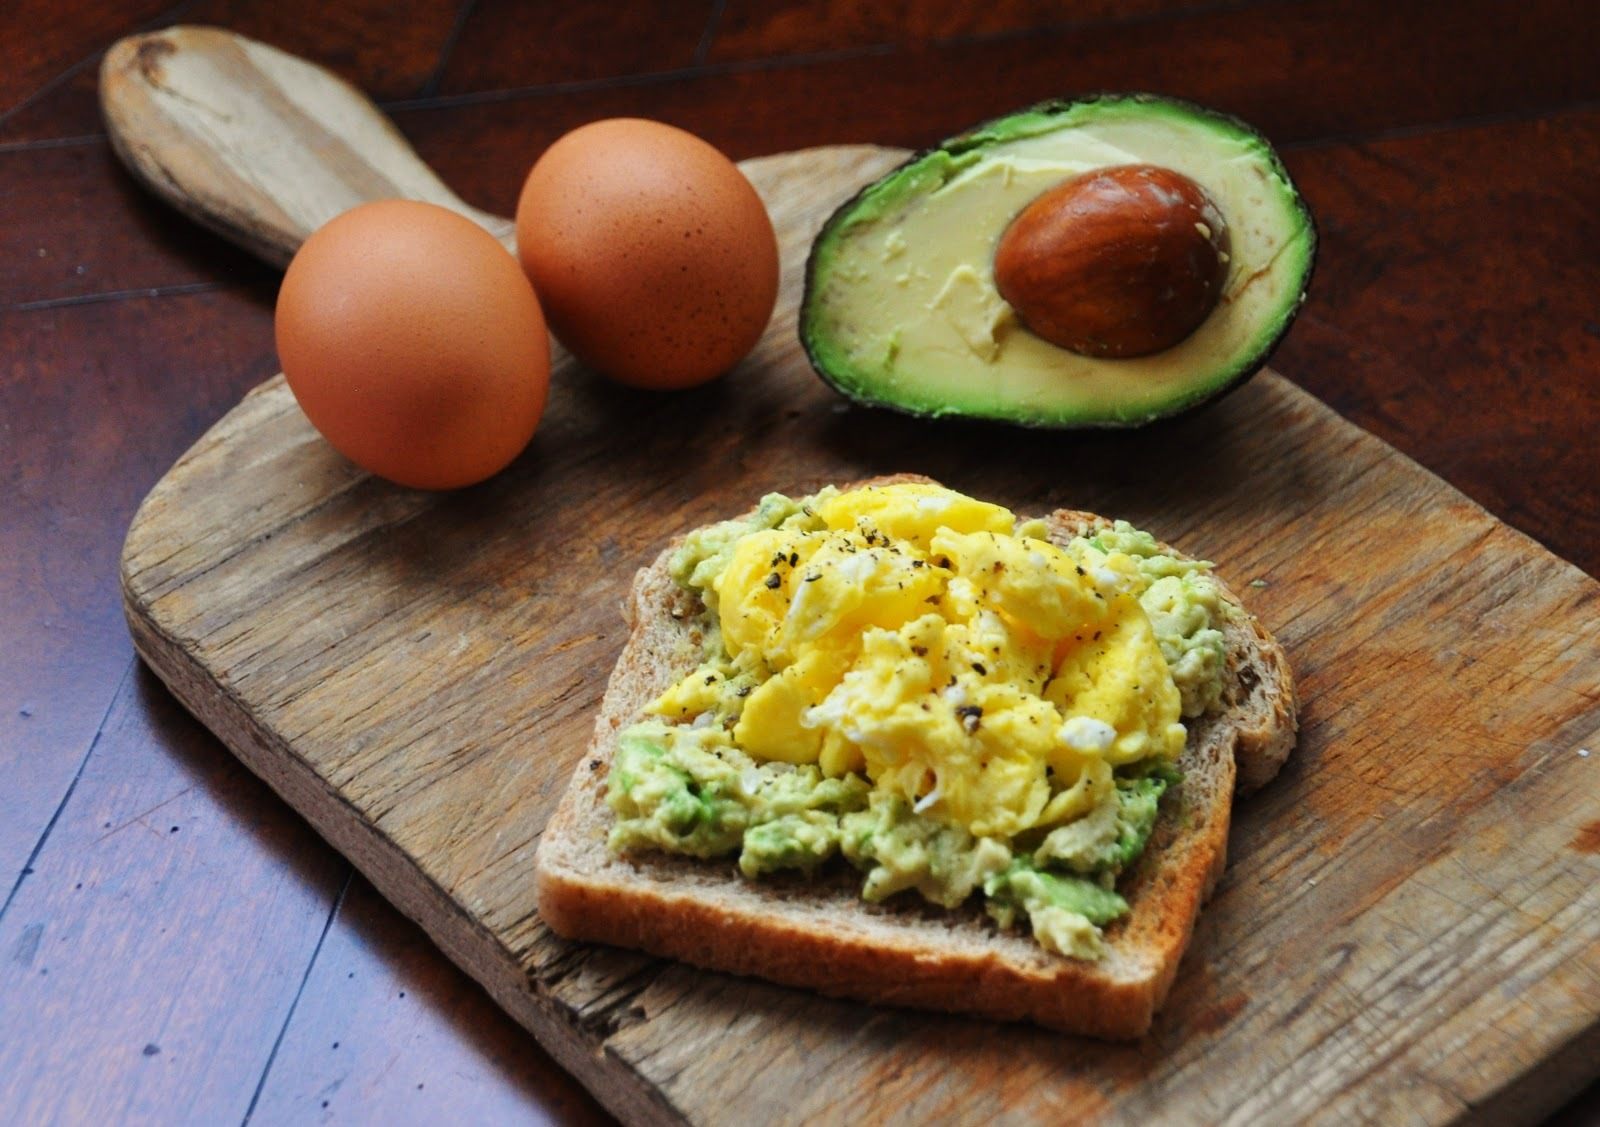 Avocado and egg toast for clean eating